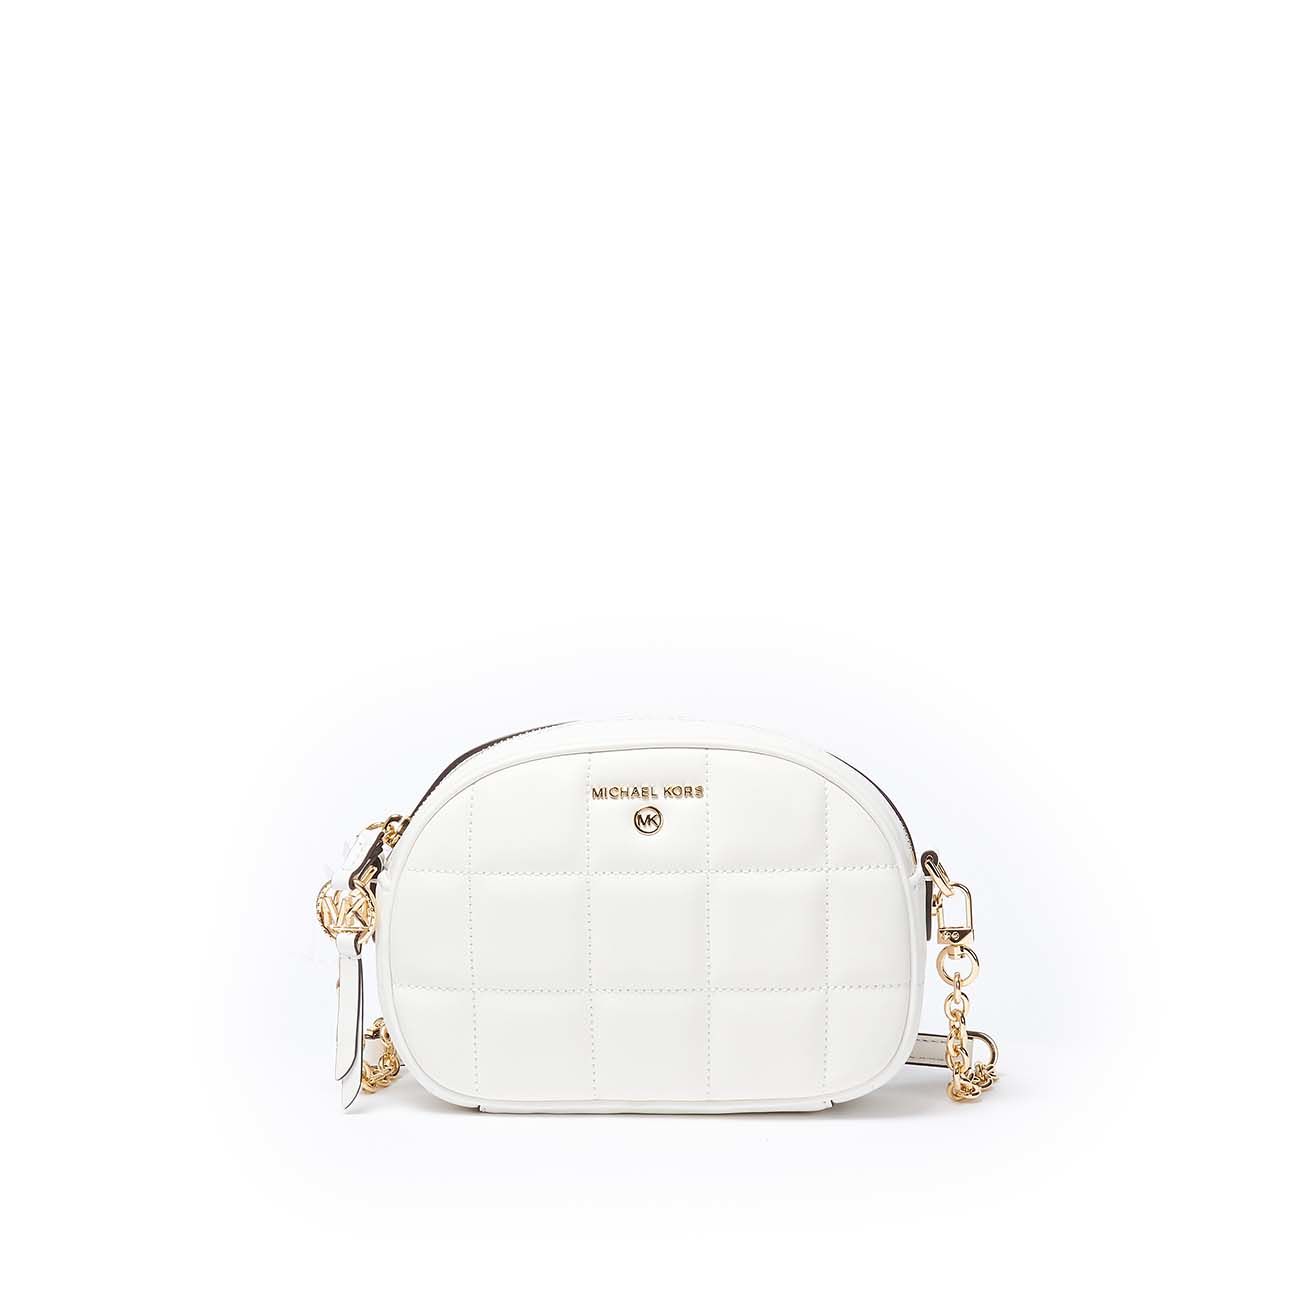 Michael Kors Navy & White Jet Set Signature Crossbody Bag | Best Price and  Reviews | Zulily